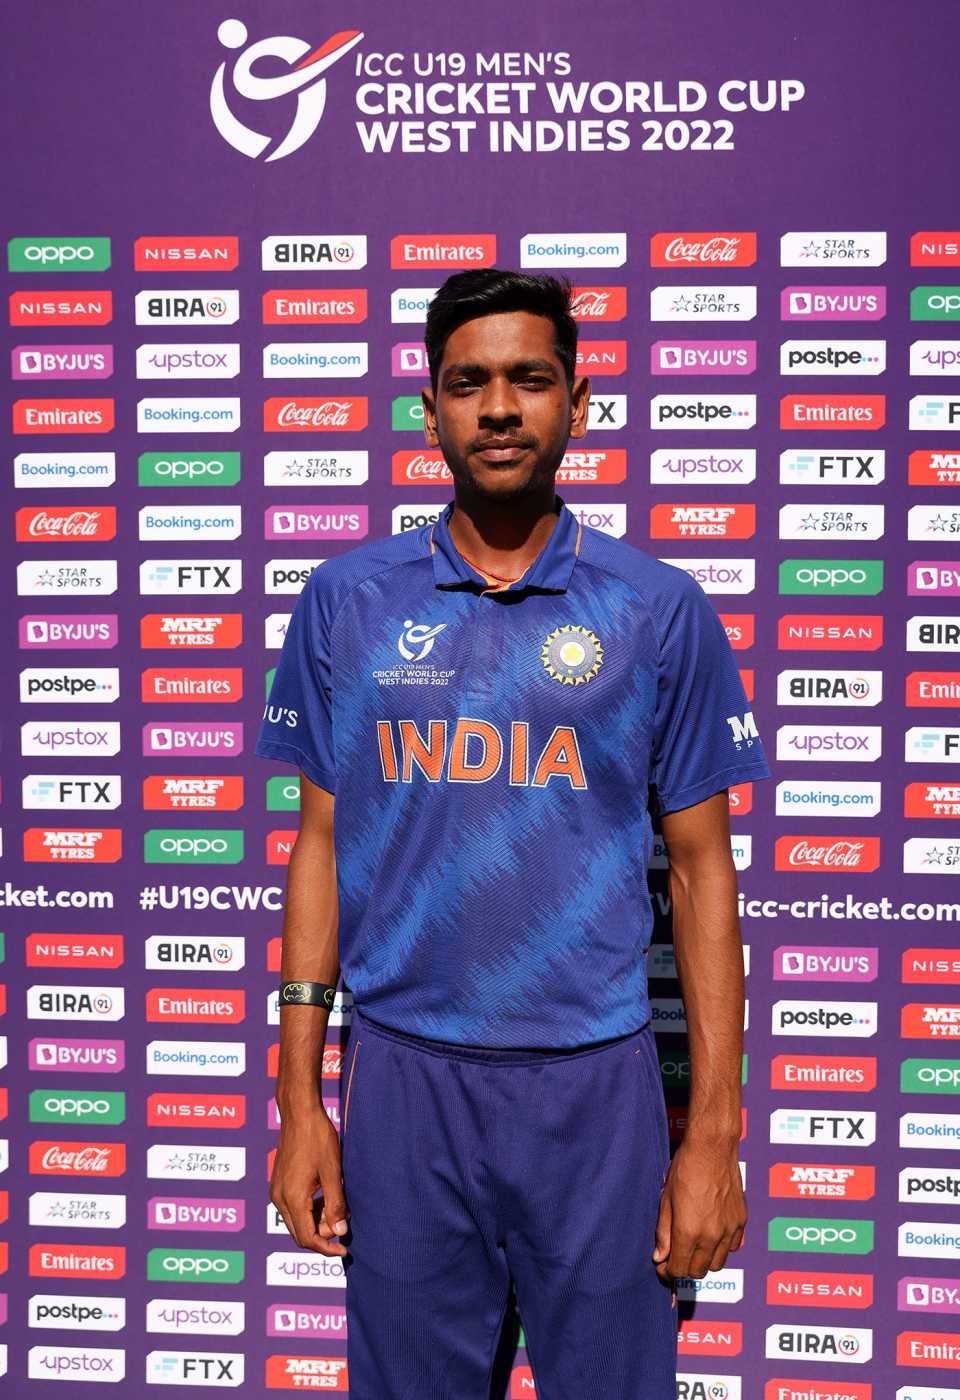 Ravi Kumar poses for a photo after being named Player of the Match, Bangladesh vs India, Under-19 World Cup 2022, quarter-final, Coolidge, January 29, 2022